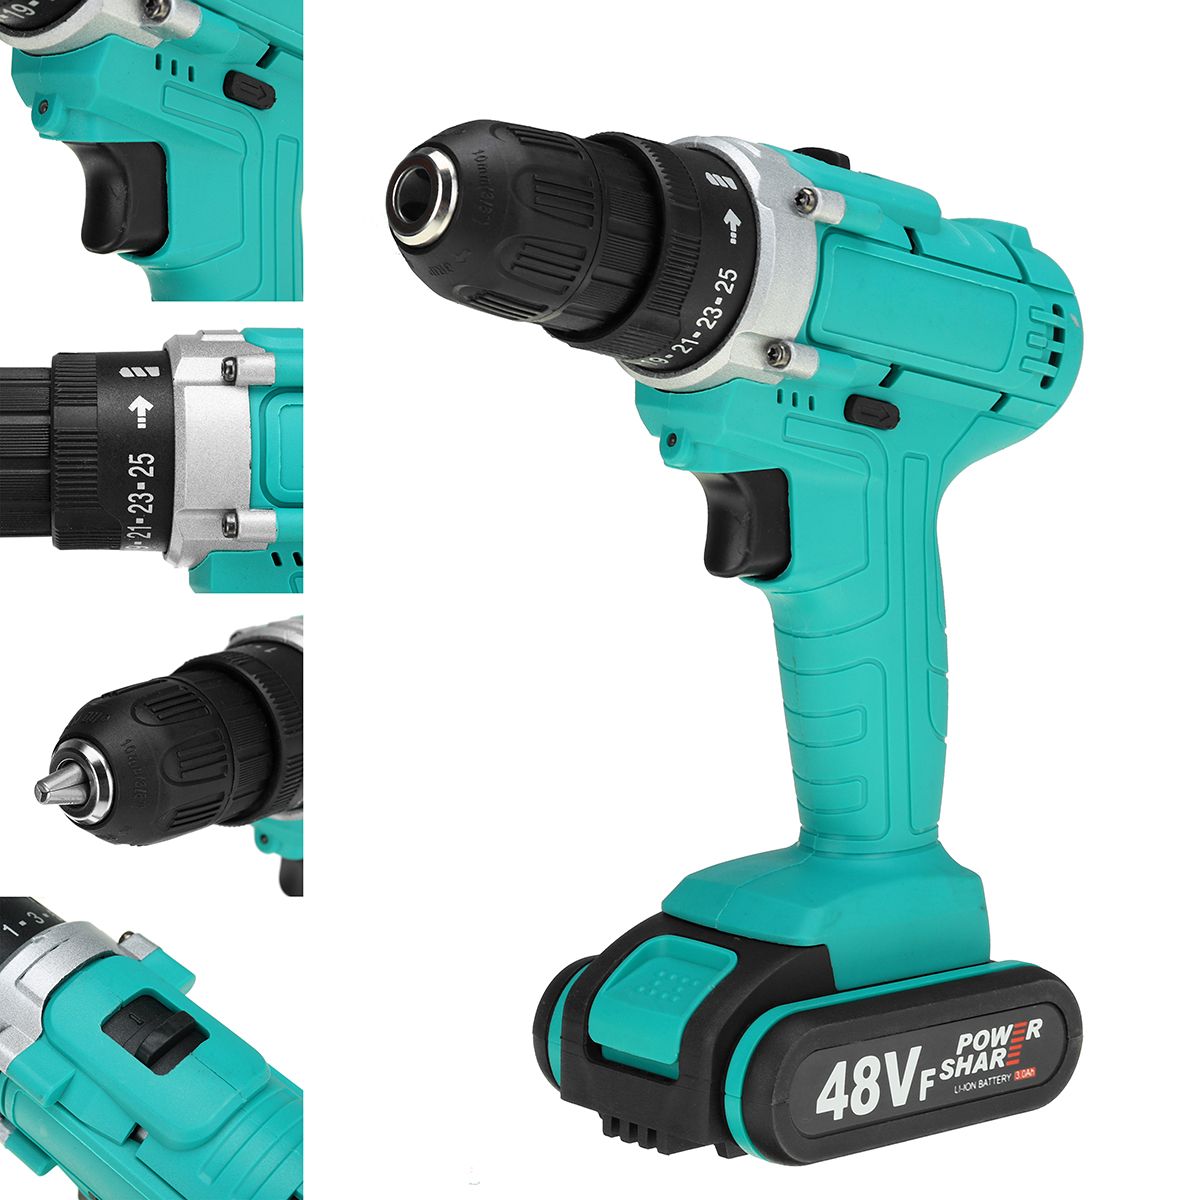 48V-38-Chuck-Powered-Electric-Drill-LED-Light-Cordless-Screwdriver-W-12x-Battery-1740218